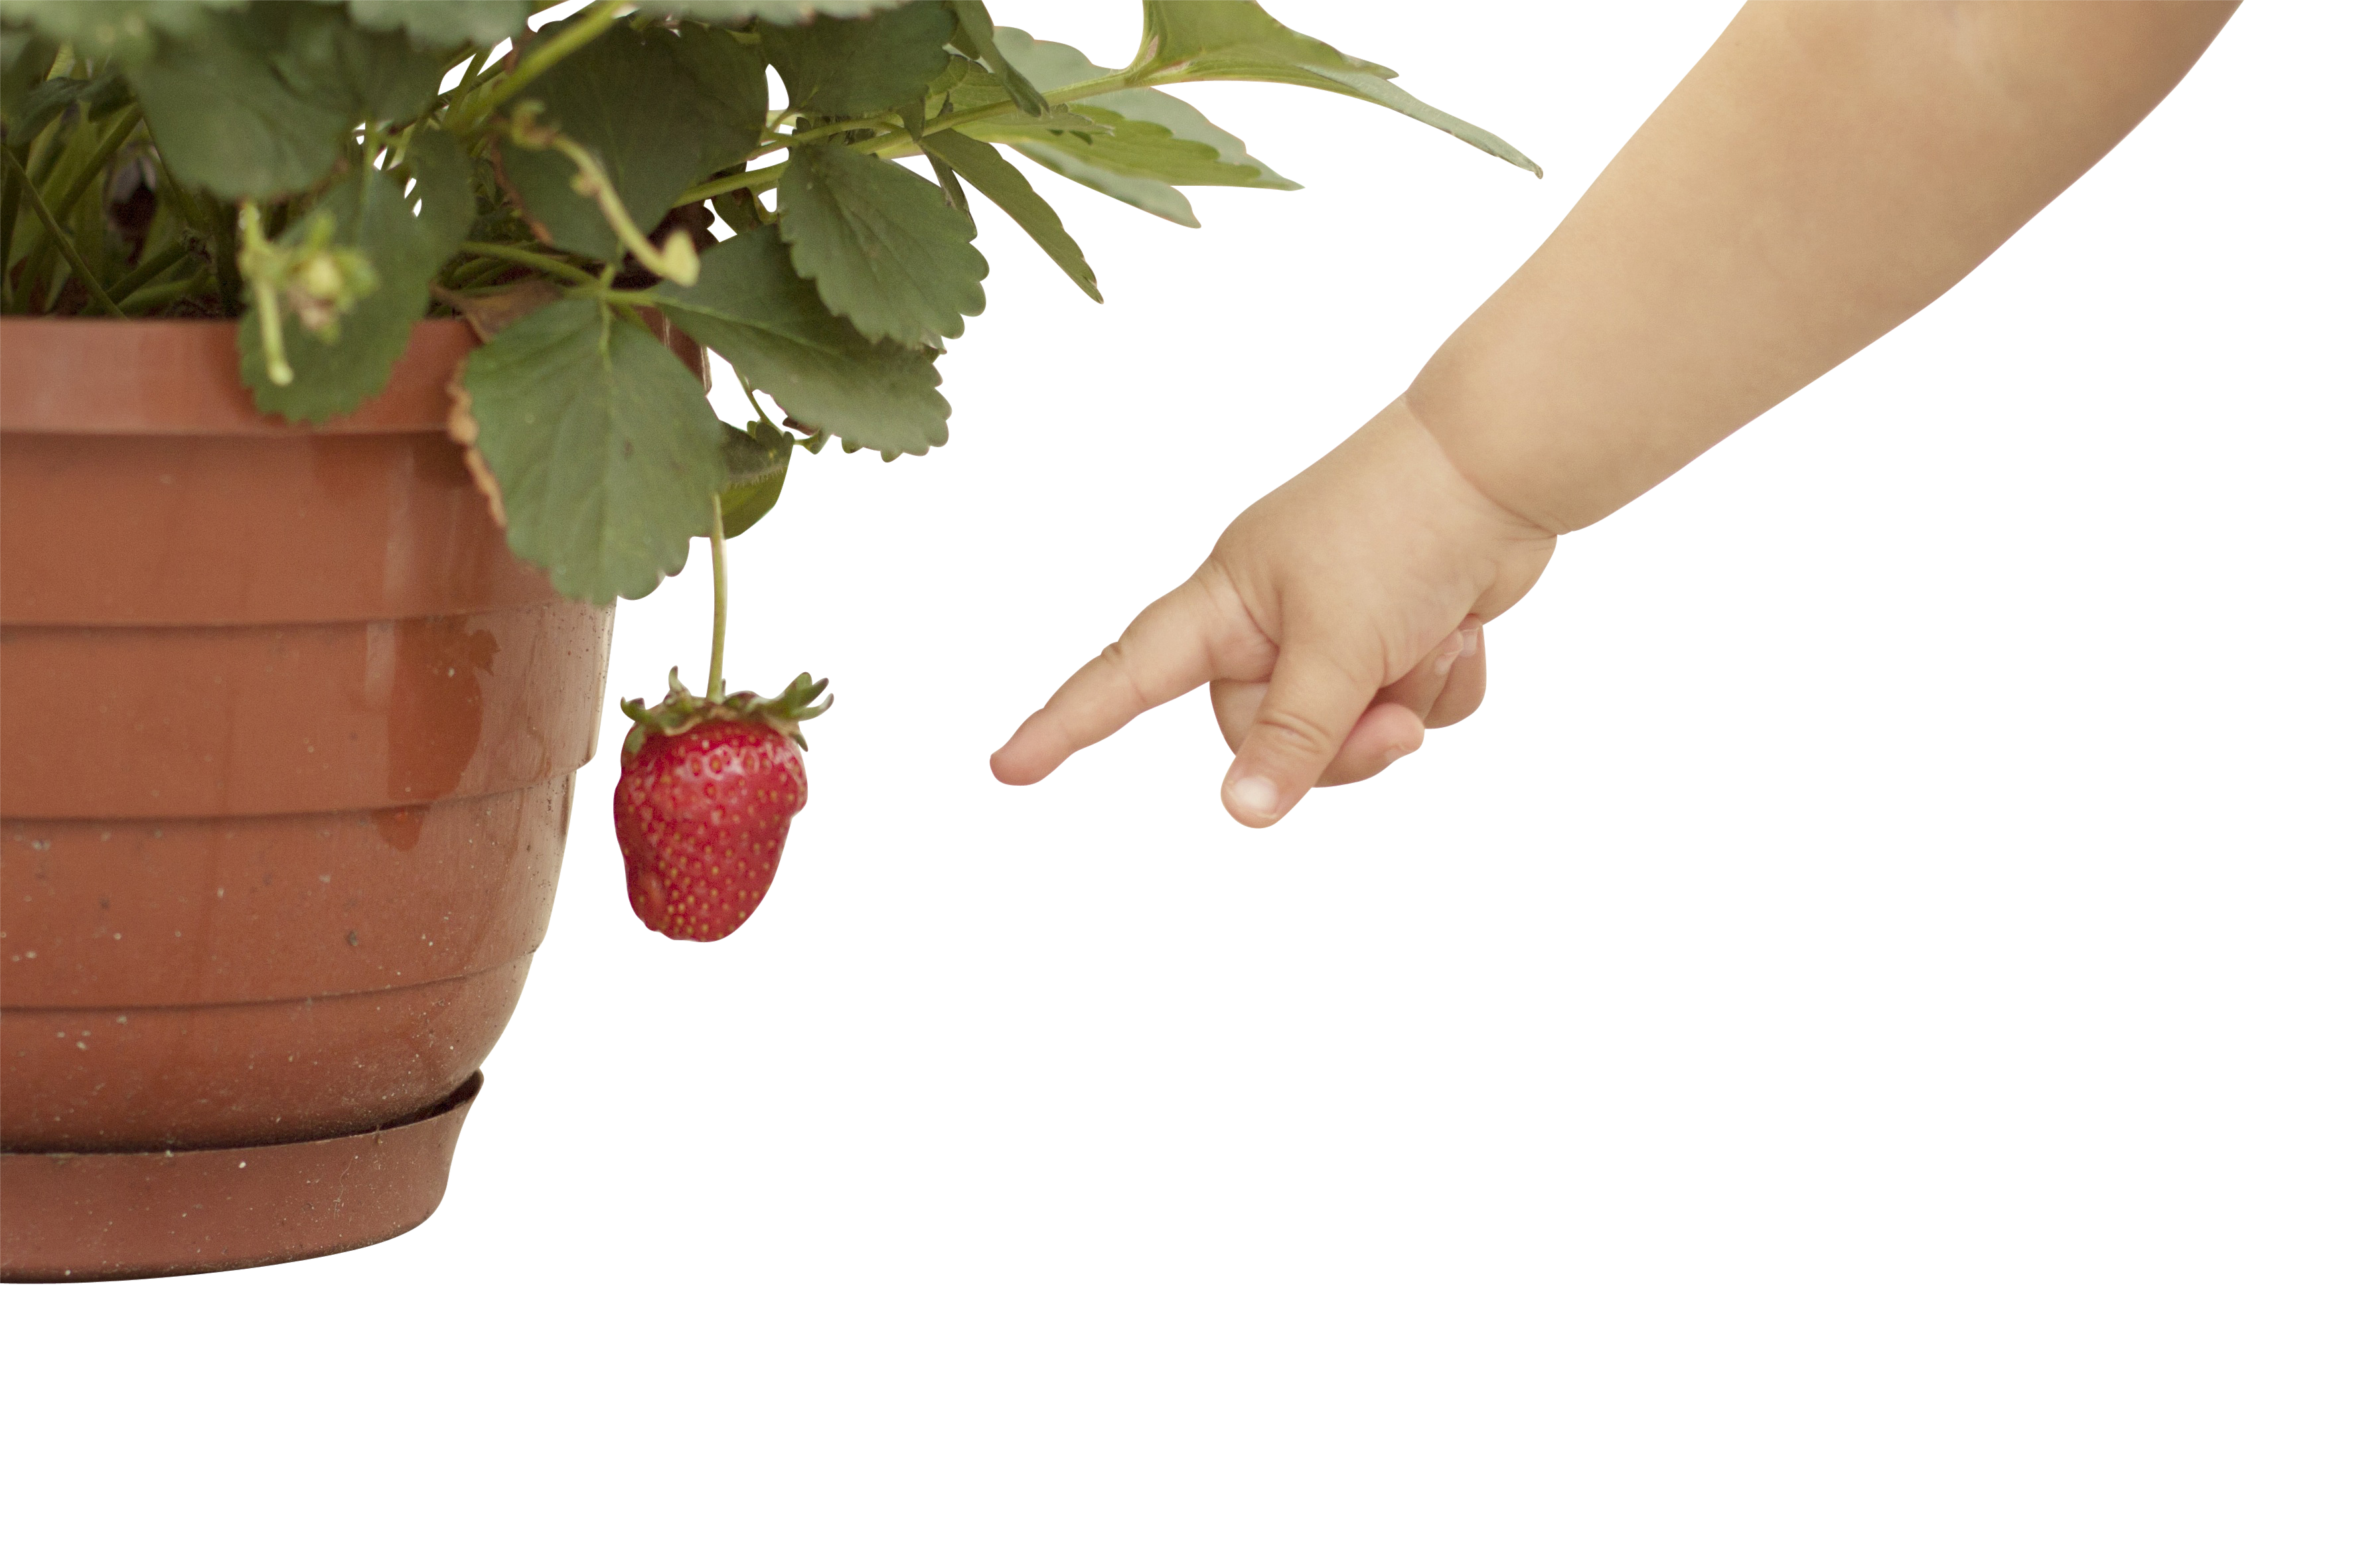 Baby hand Pointing at Strawberry